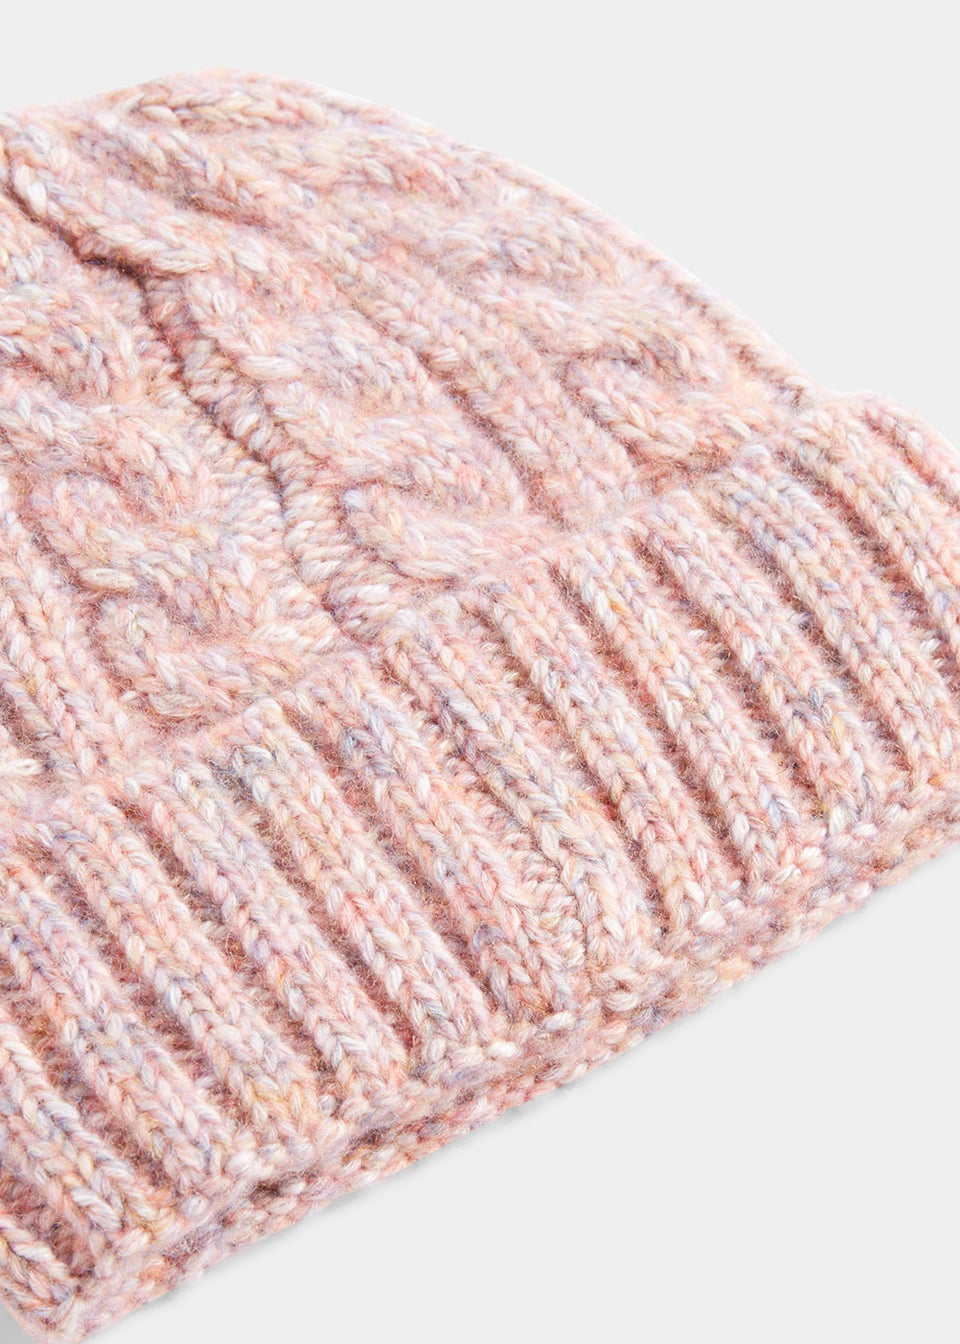 Pink Chunky Cable Knit Beanie Hat